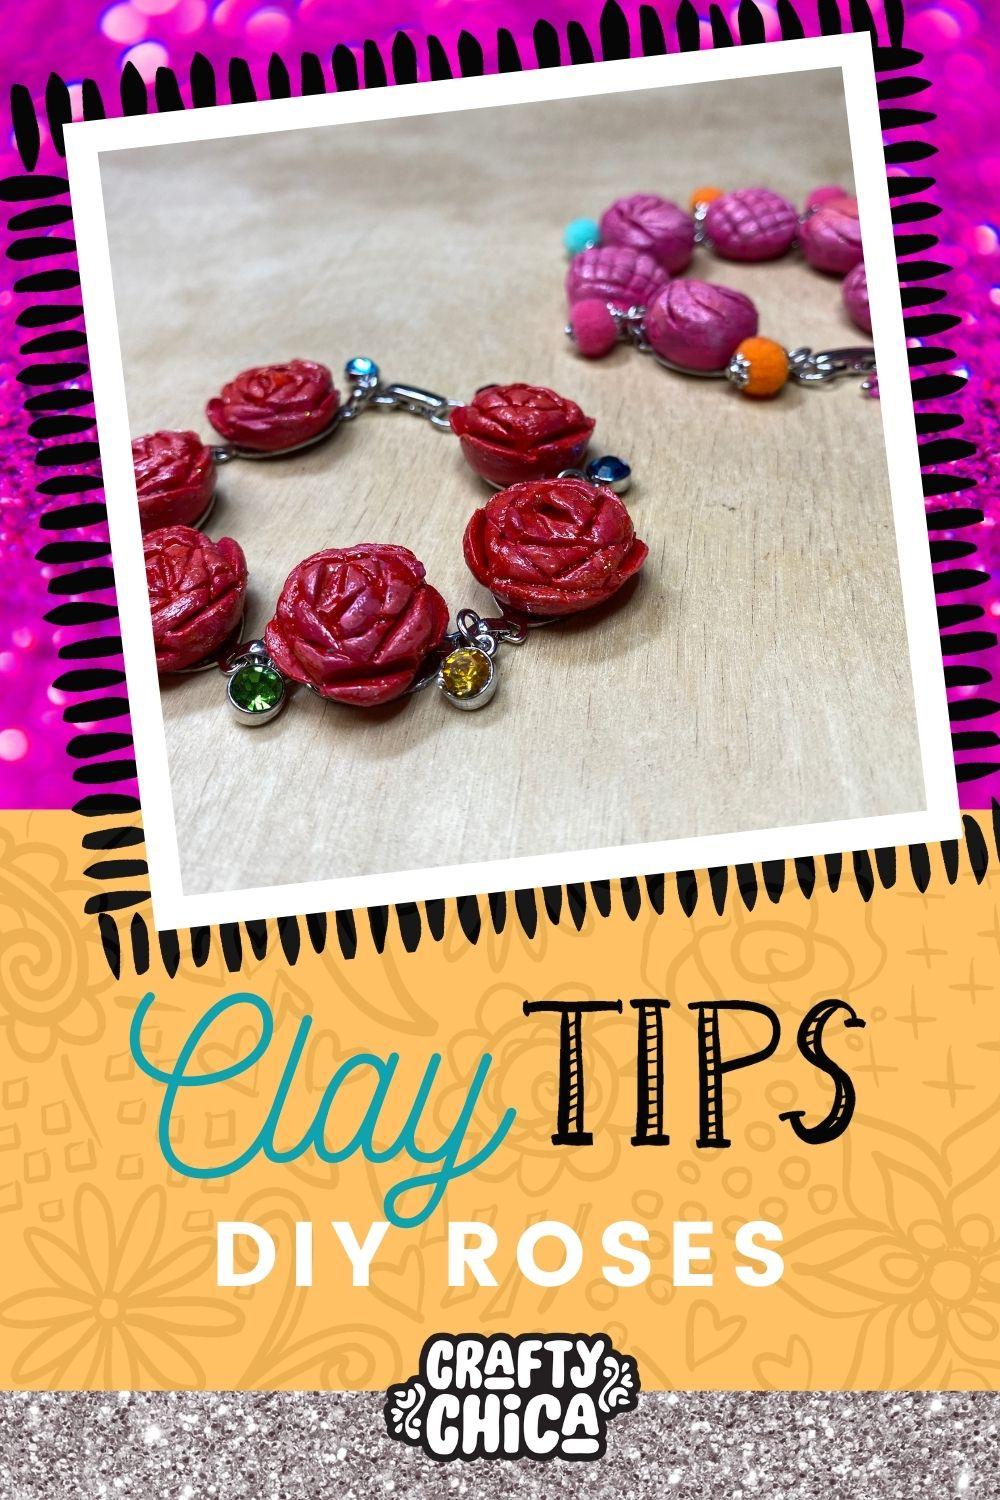 How to make clay roses